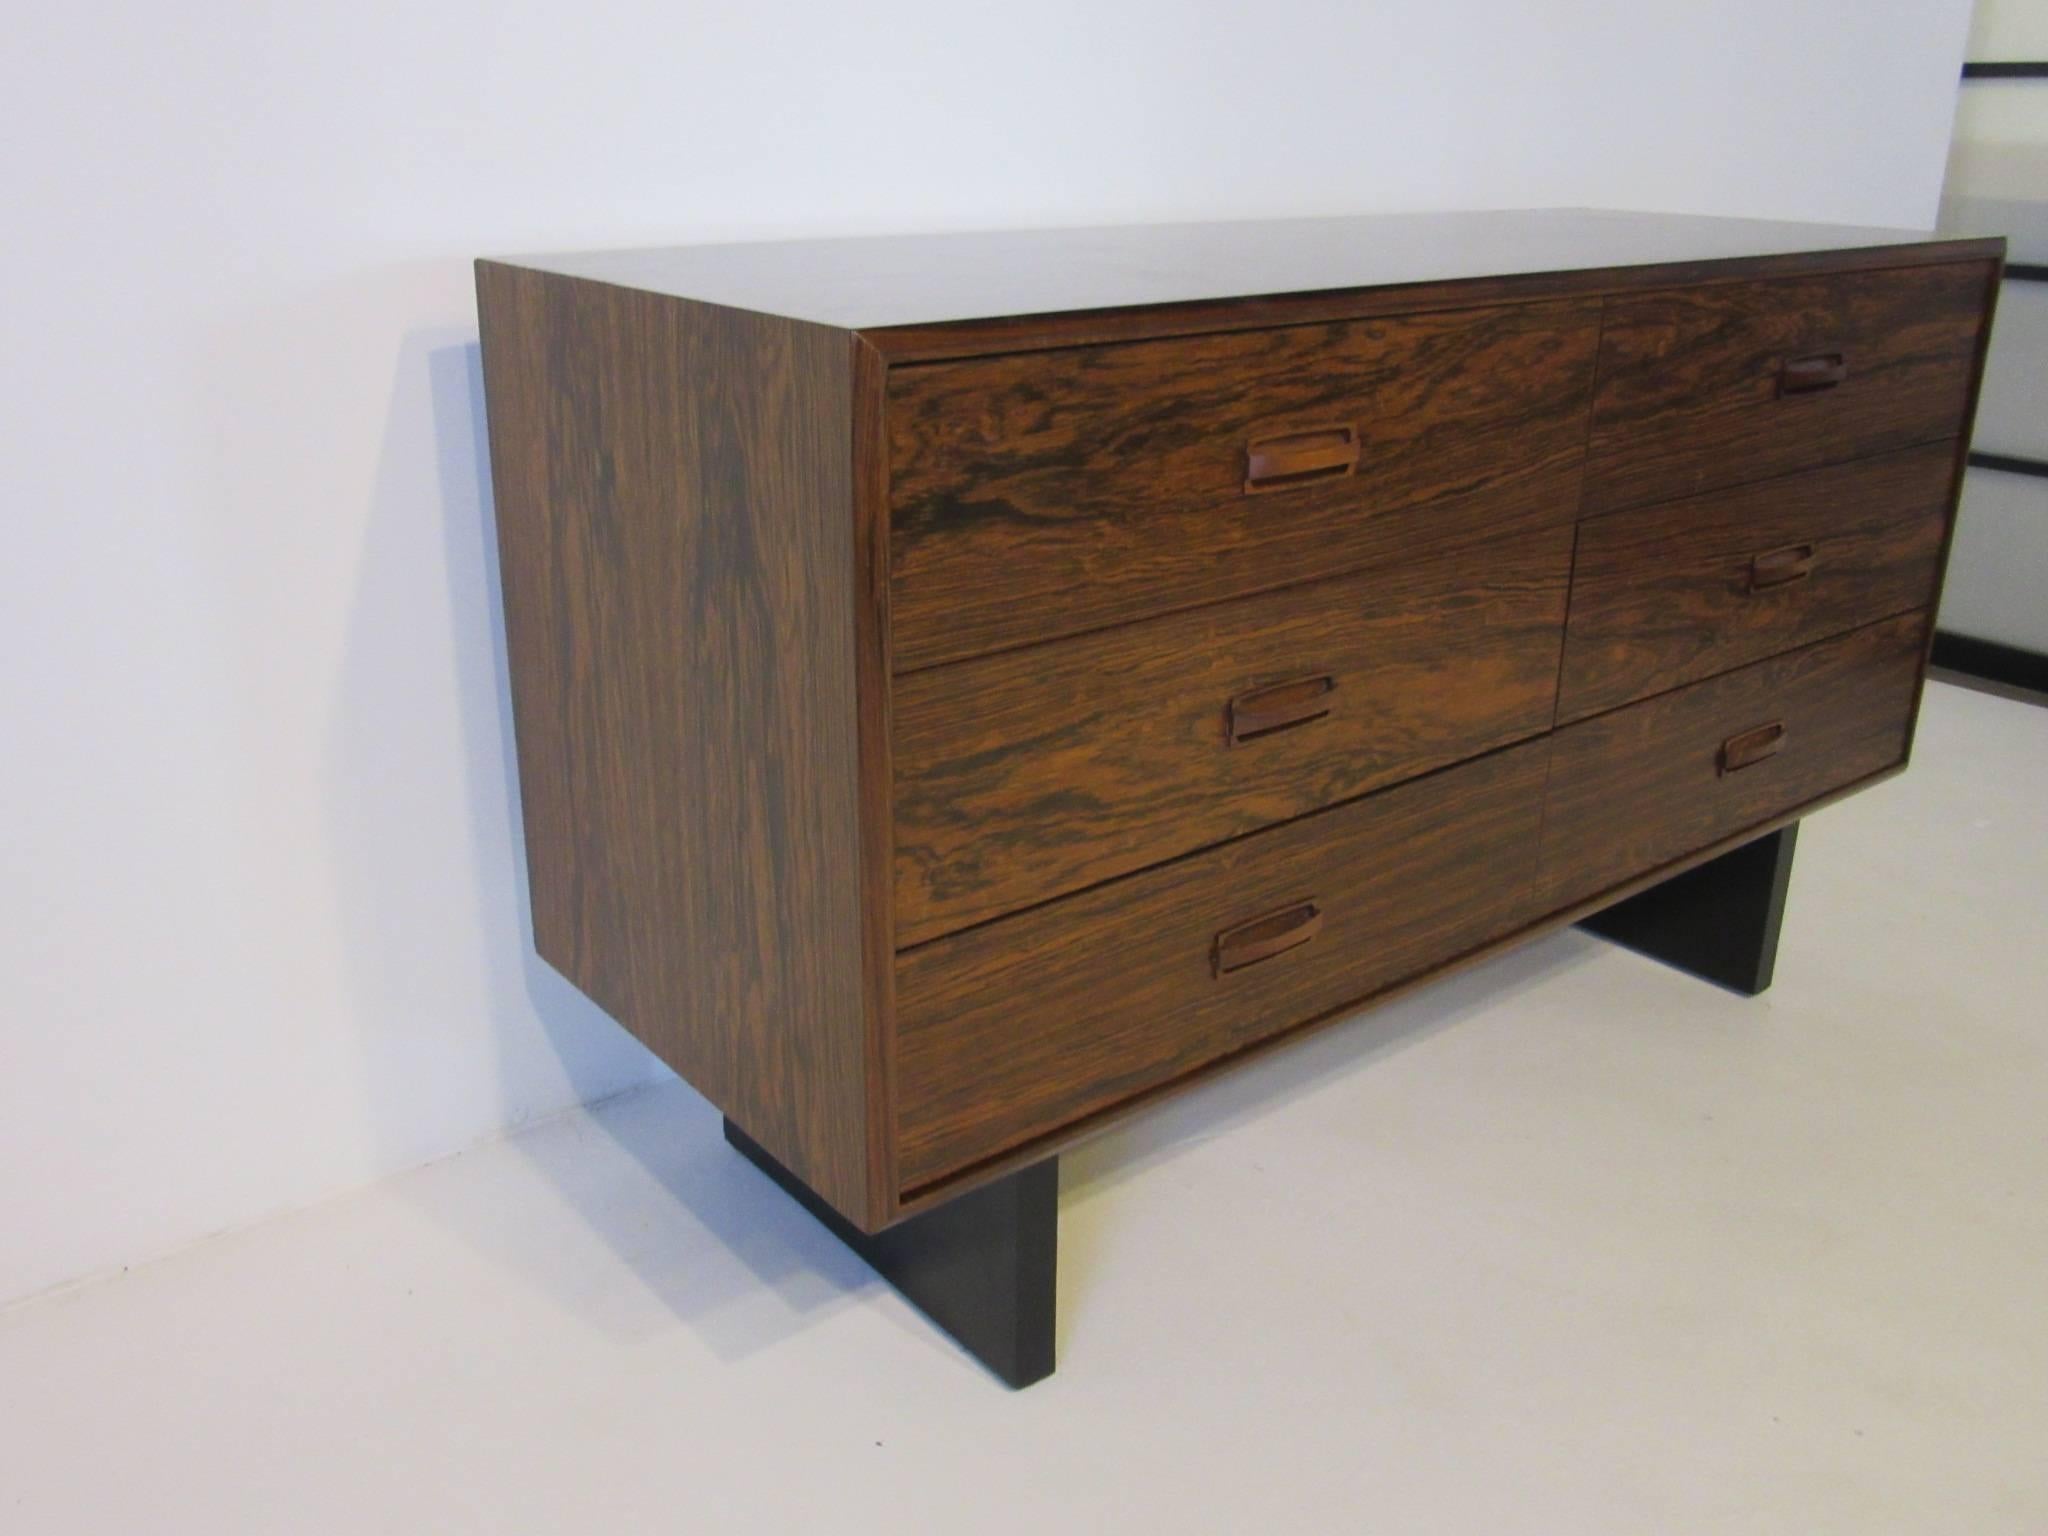 A well grained Brazilian rosewood six-drawer dresser chest with wooden pulls sitting on two satin black plinth styled bases made and designed in the manner of Danish modern. This compact sized piece works great for a smaller or tight fitting area.